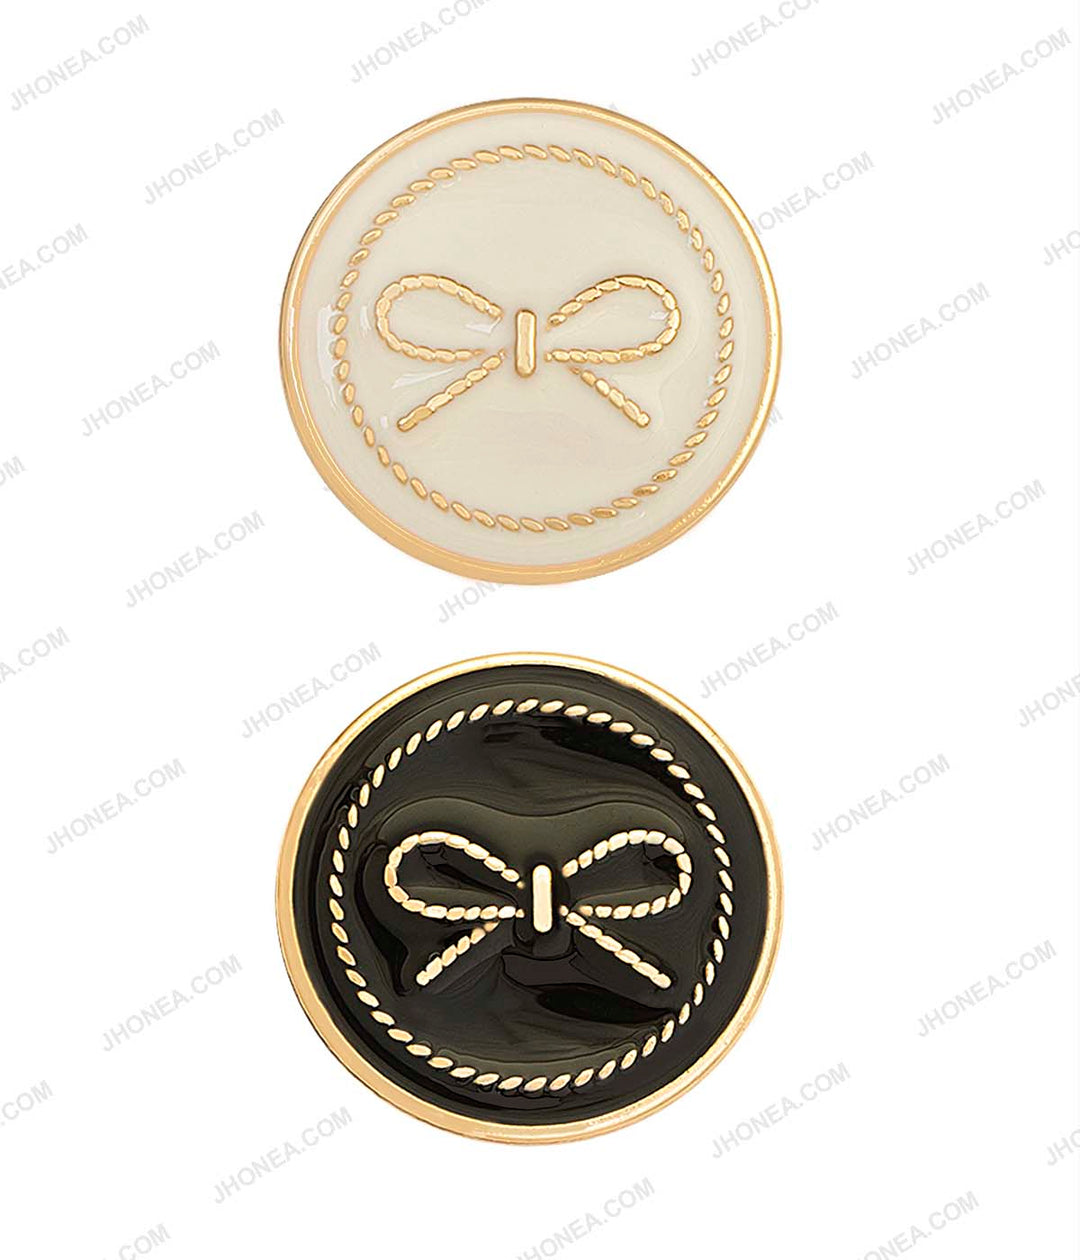 Premium Black & White Bow Design Western Clothing Metal Buttons